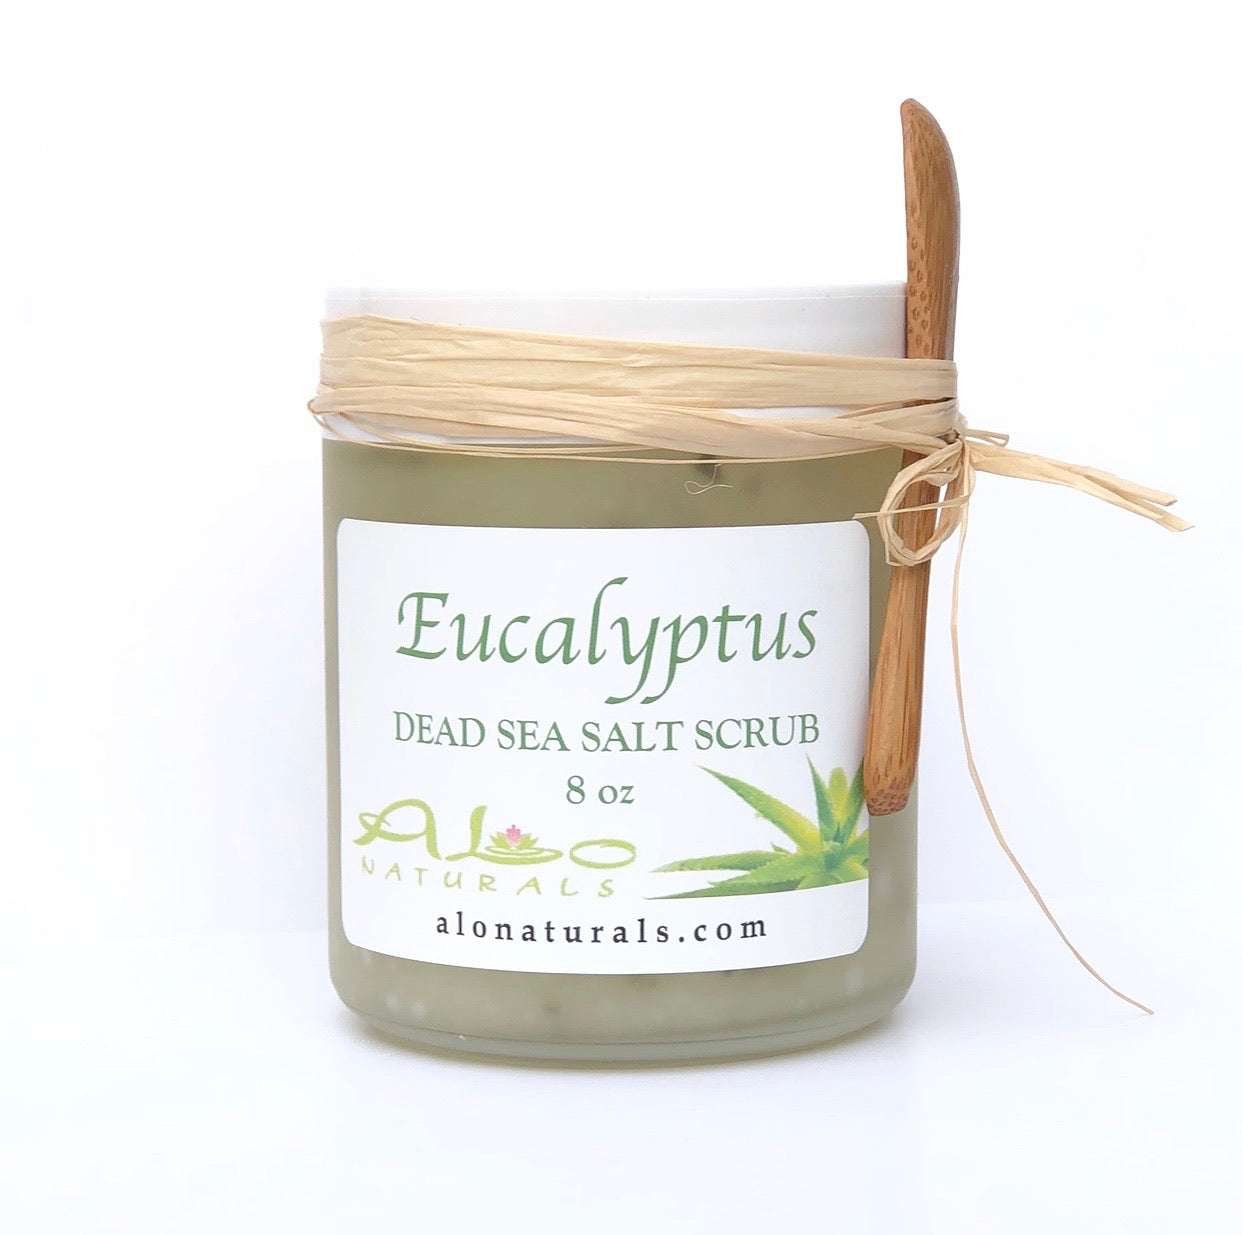 Eucalyptus is a well liked herbal scent known for creating a relaxing mood, opening up sinuses and offering antibacterial properties.  Dead Sea salt has been used for centuries to promote health and wellness, treat minor skin disorders, detoxify the body, aid in anti-aging, and improve blood circulation which promotes healing and renewal.  This salt has a lower sodium content than regular sea salt which balances minerals that feed and nourish the skin and body.  8 ounce jar.  Comes with bamboo spoon.